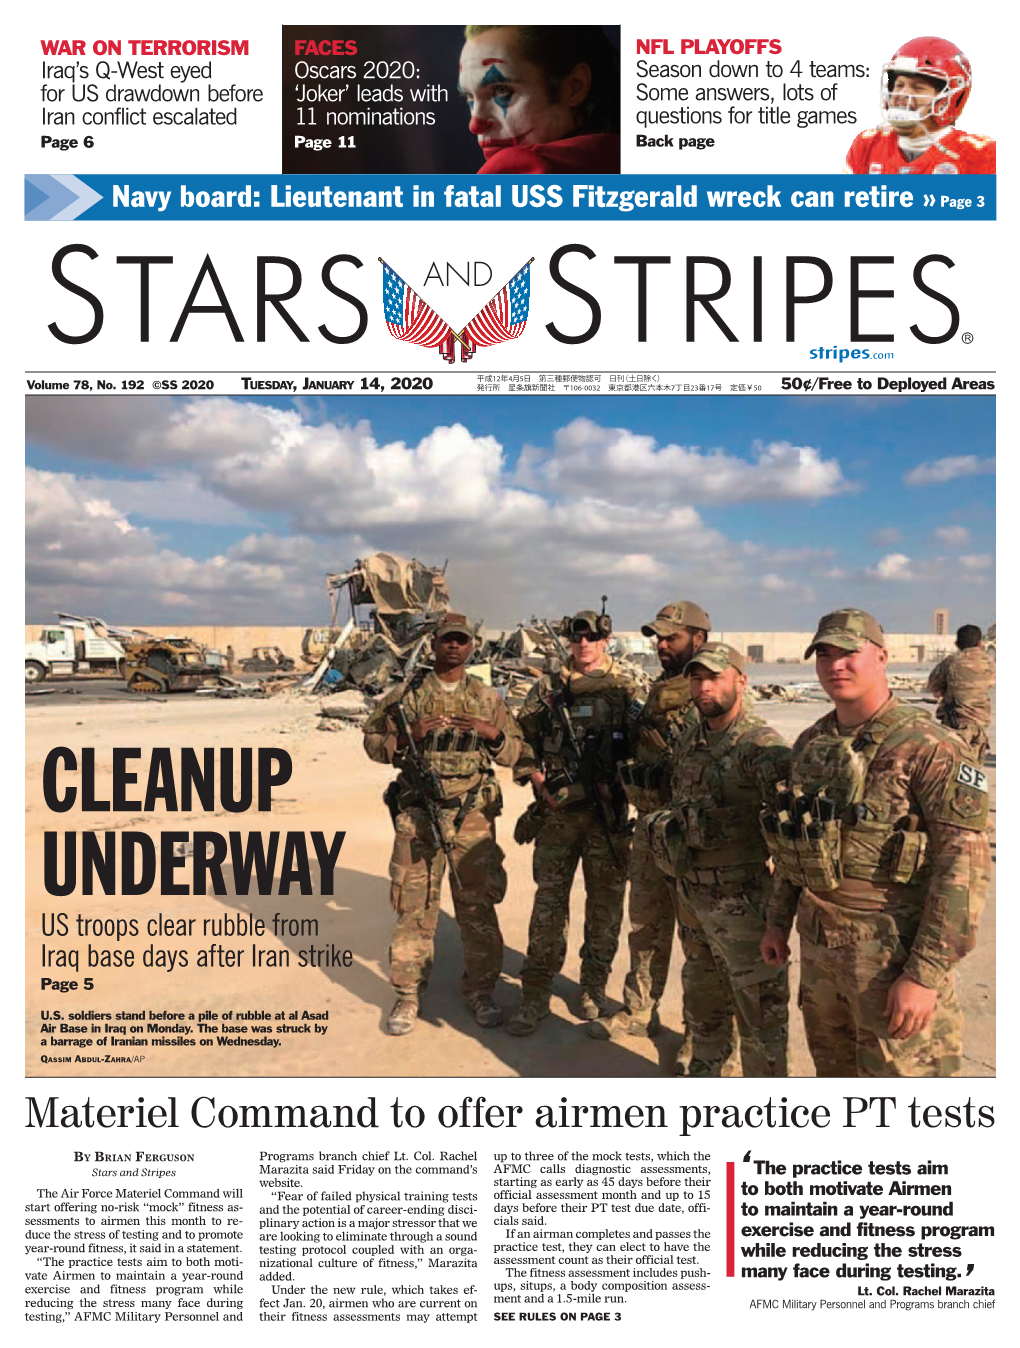 CLEANUP UNDERWAY US Troops Clear Rubble from Iraq Base Days After Iran Strike Page 5